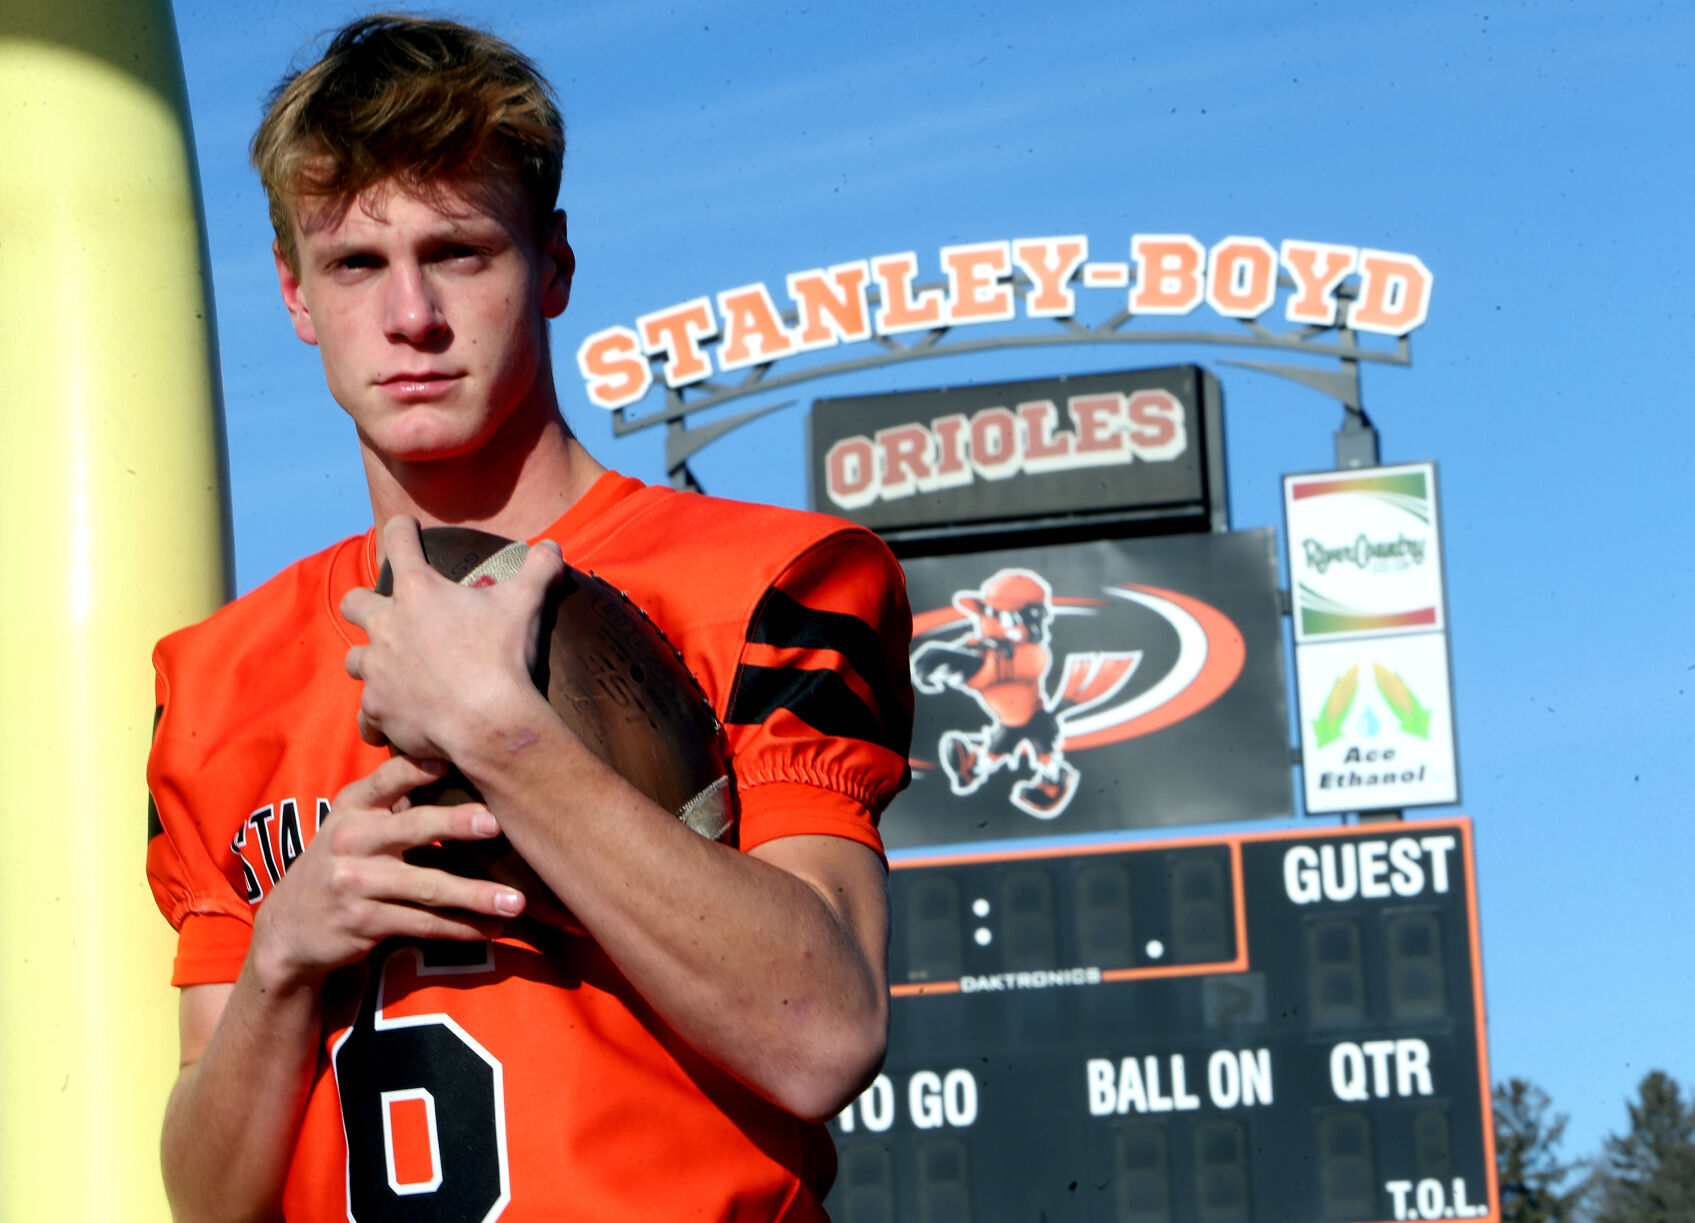 Madden Mahr: Stanley-Boyd Junior Named 2023 Chippewa County Player of the Year